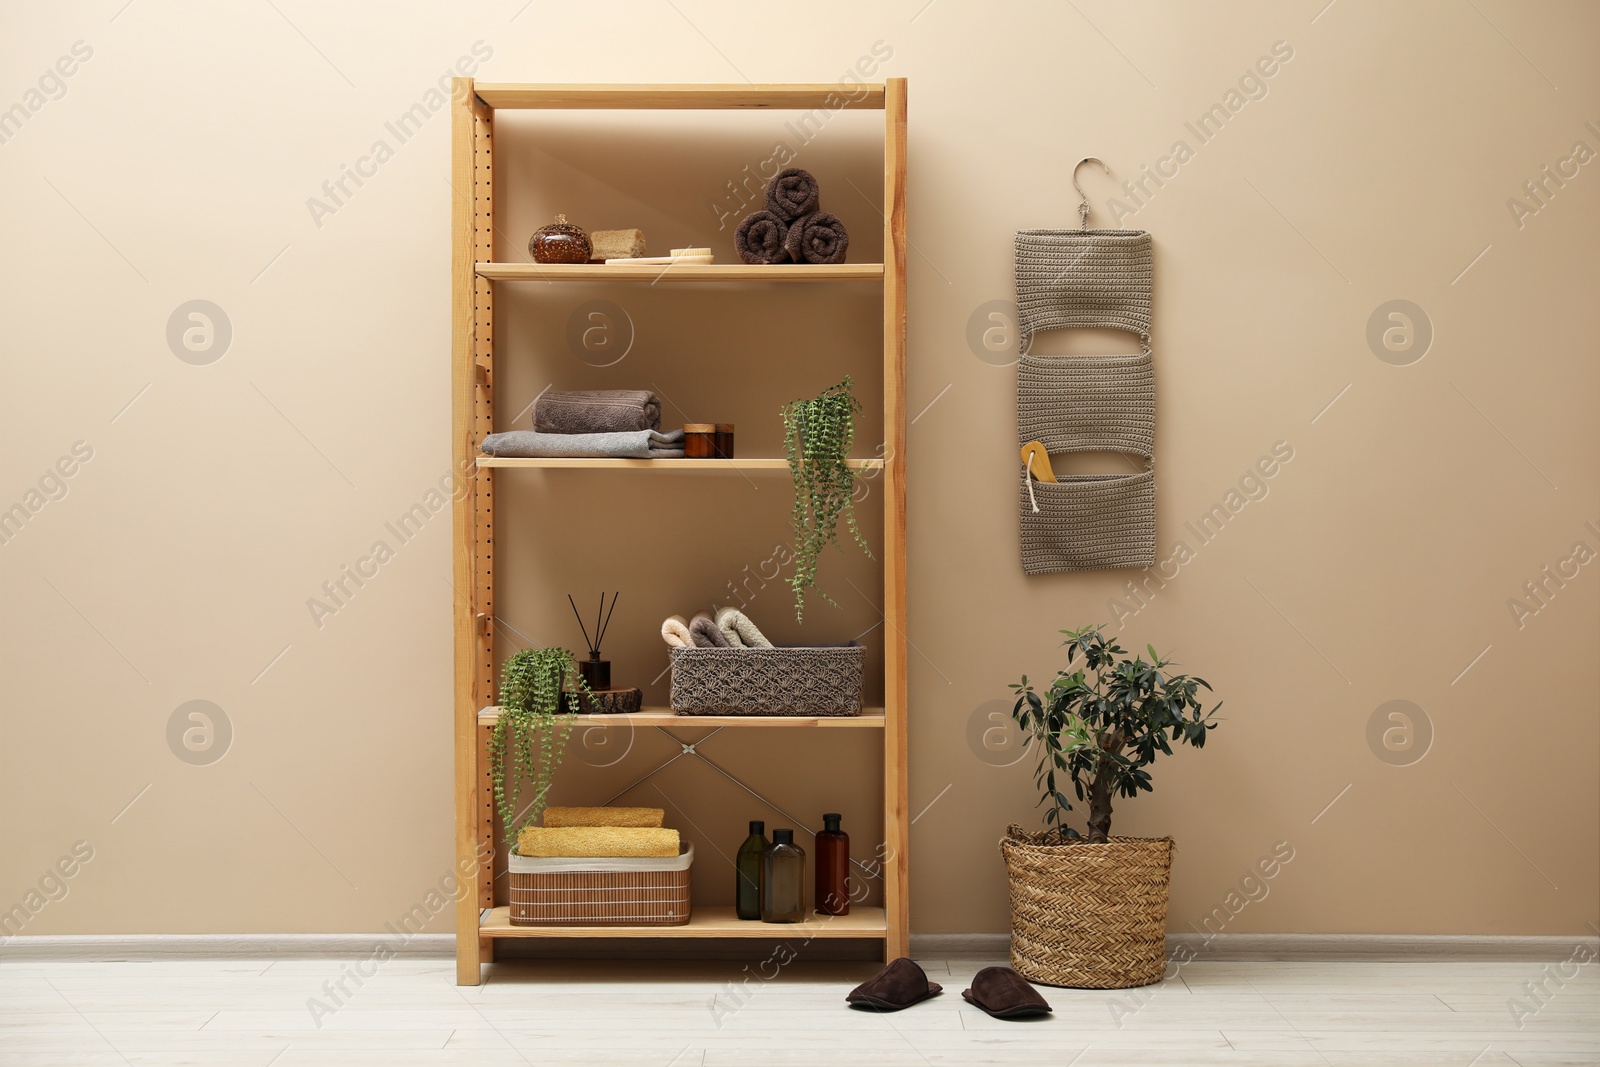 Photo of Shelving unit with soft towels, plants and bottles indoors